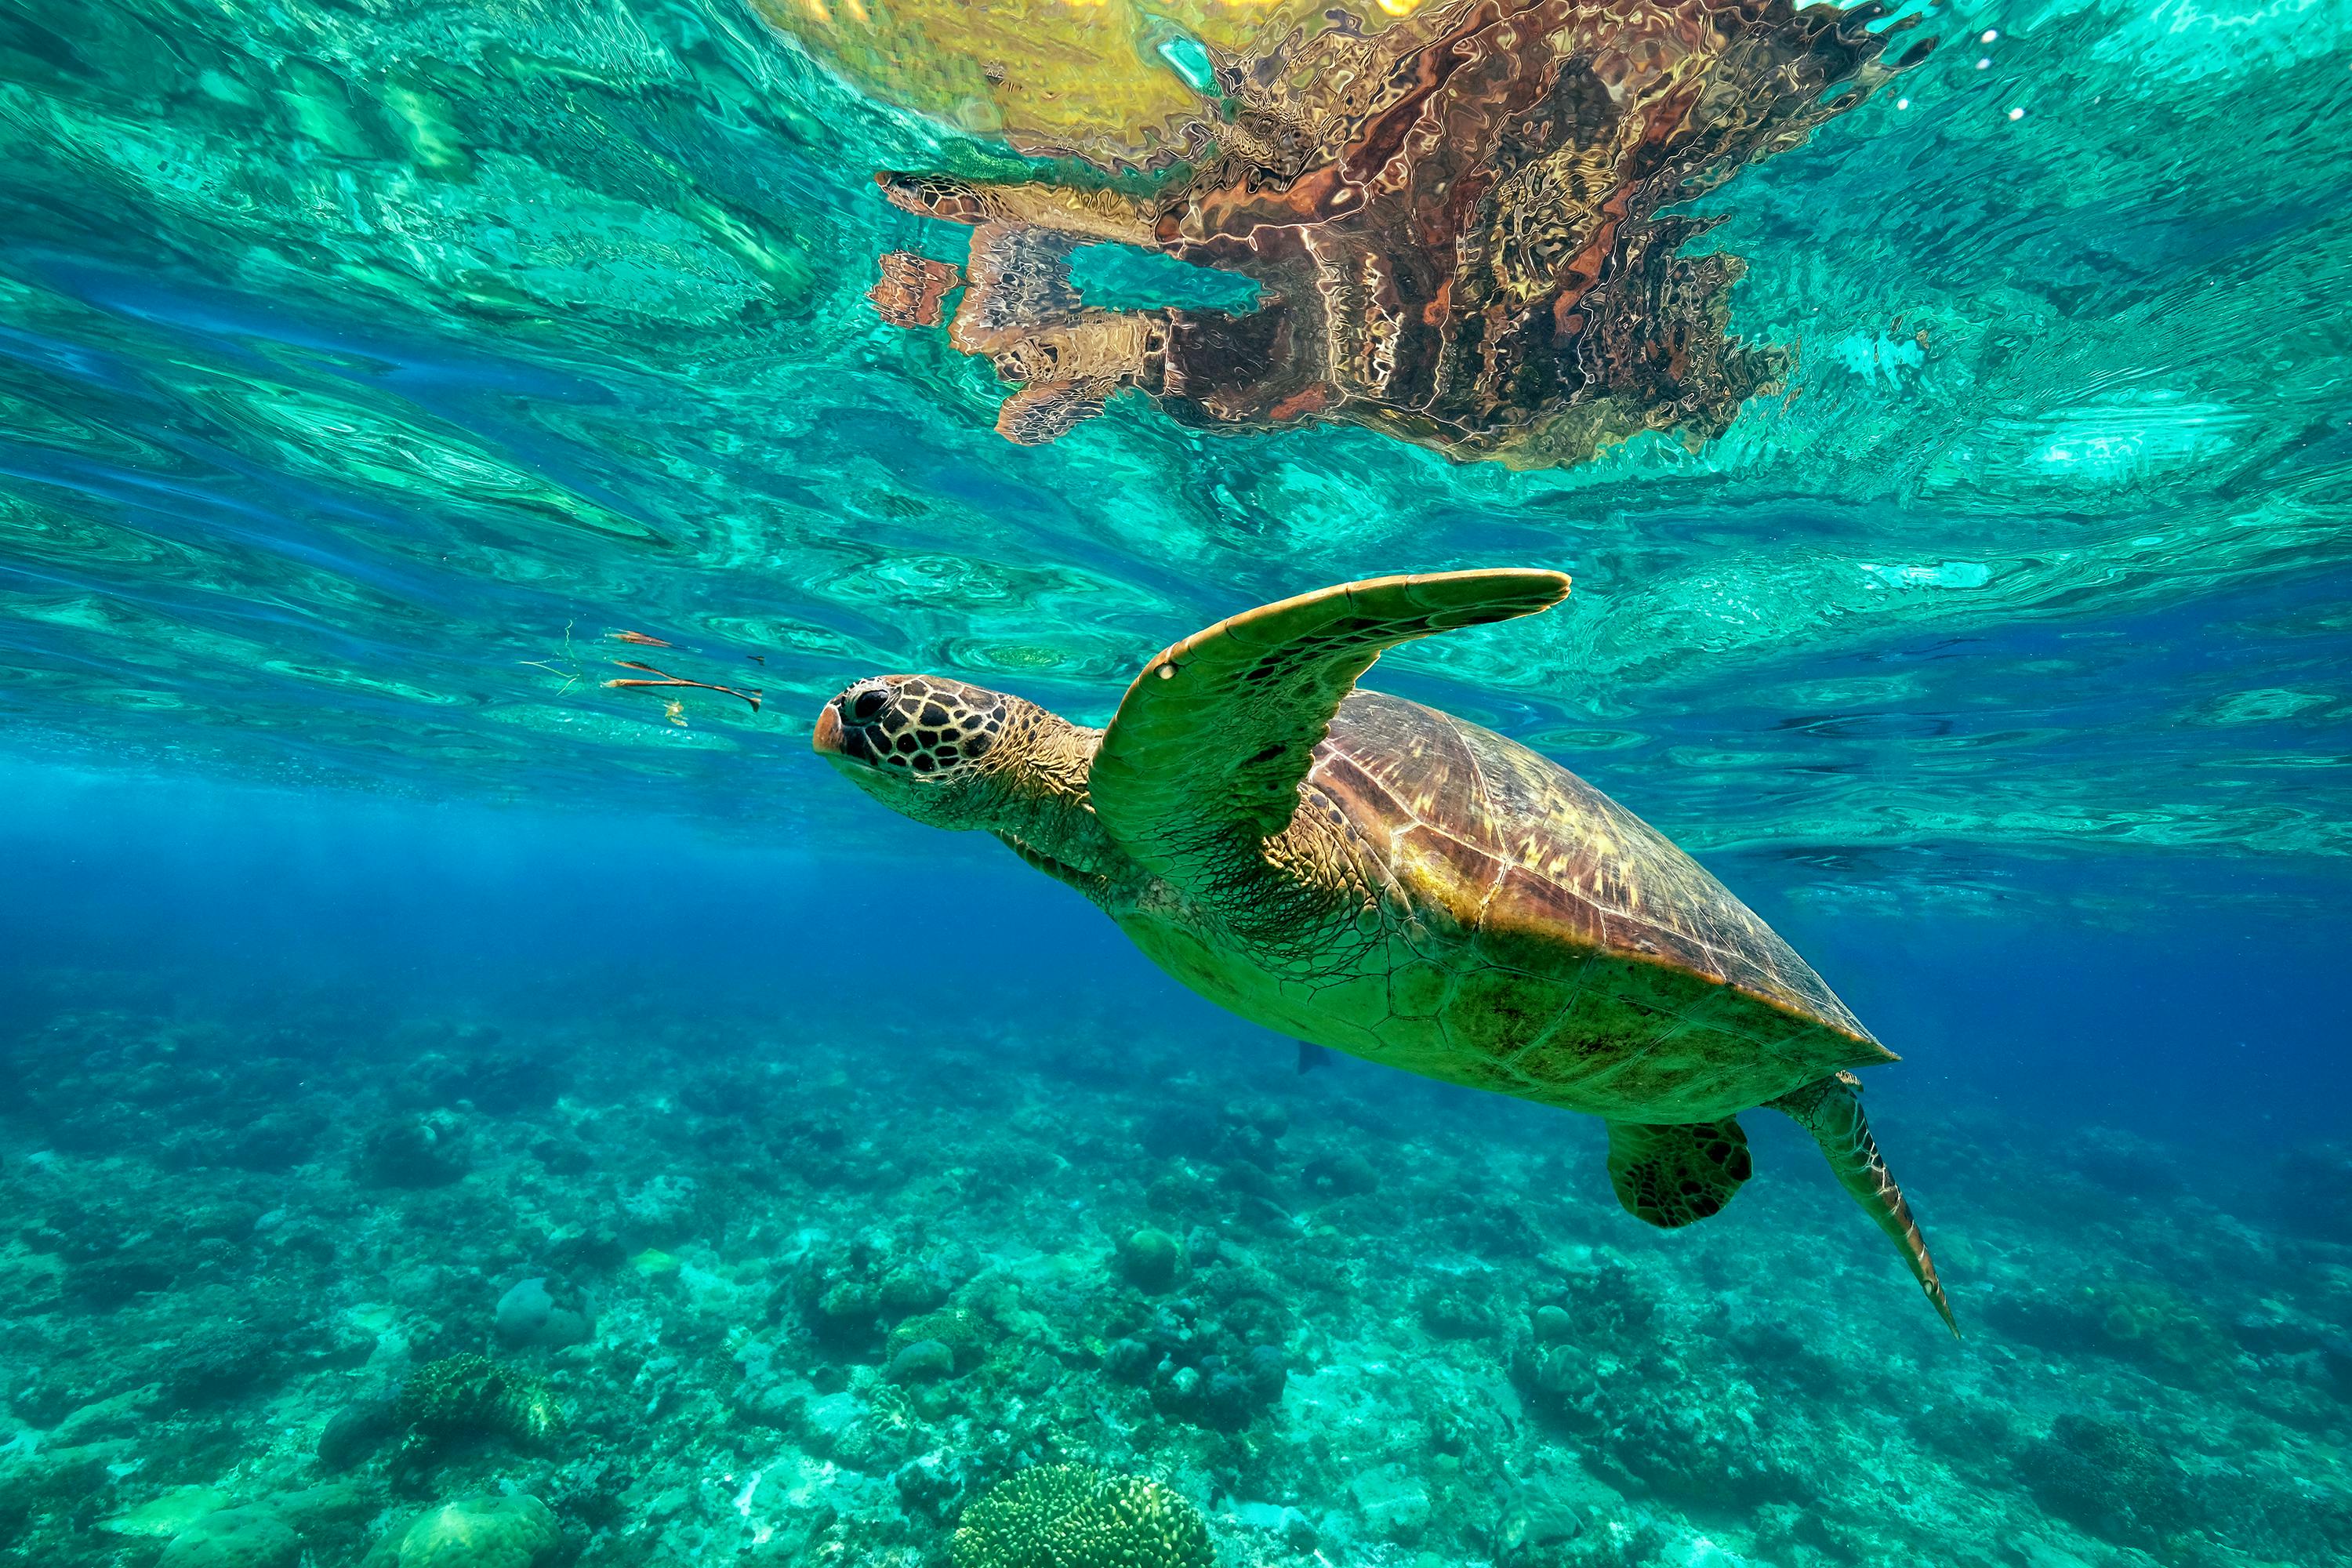 A sea turtle which can be found while snorkelling or diving in Apo Island